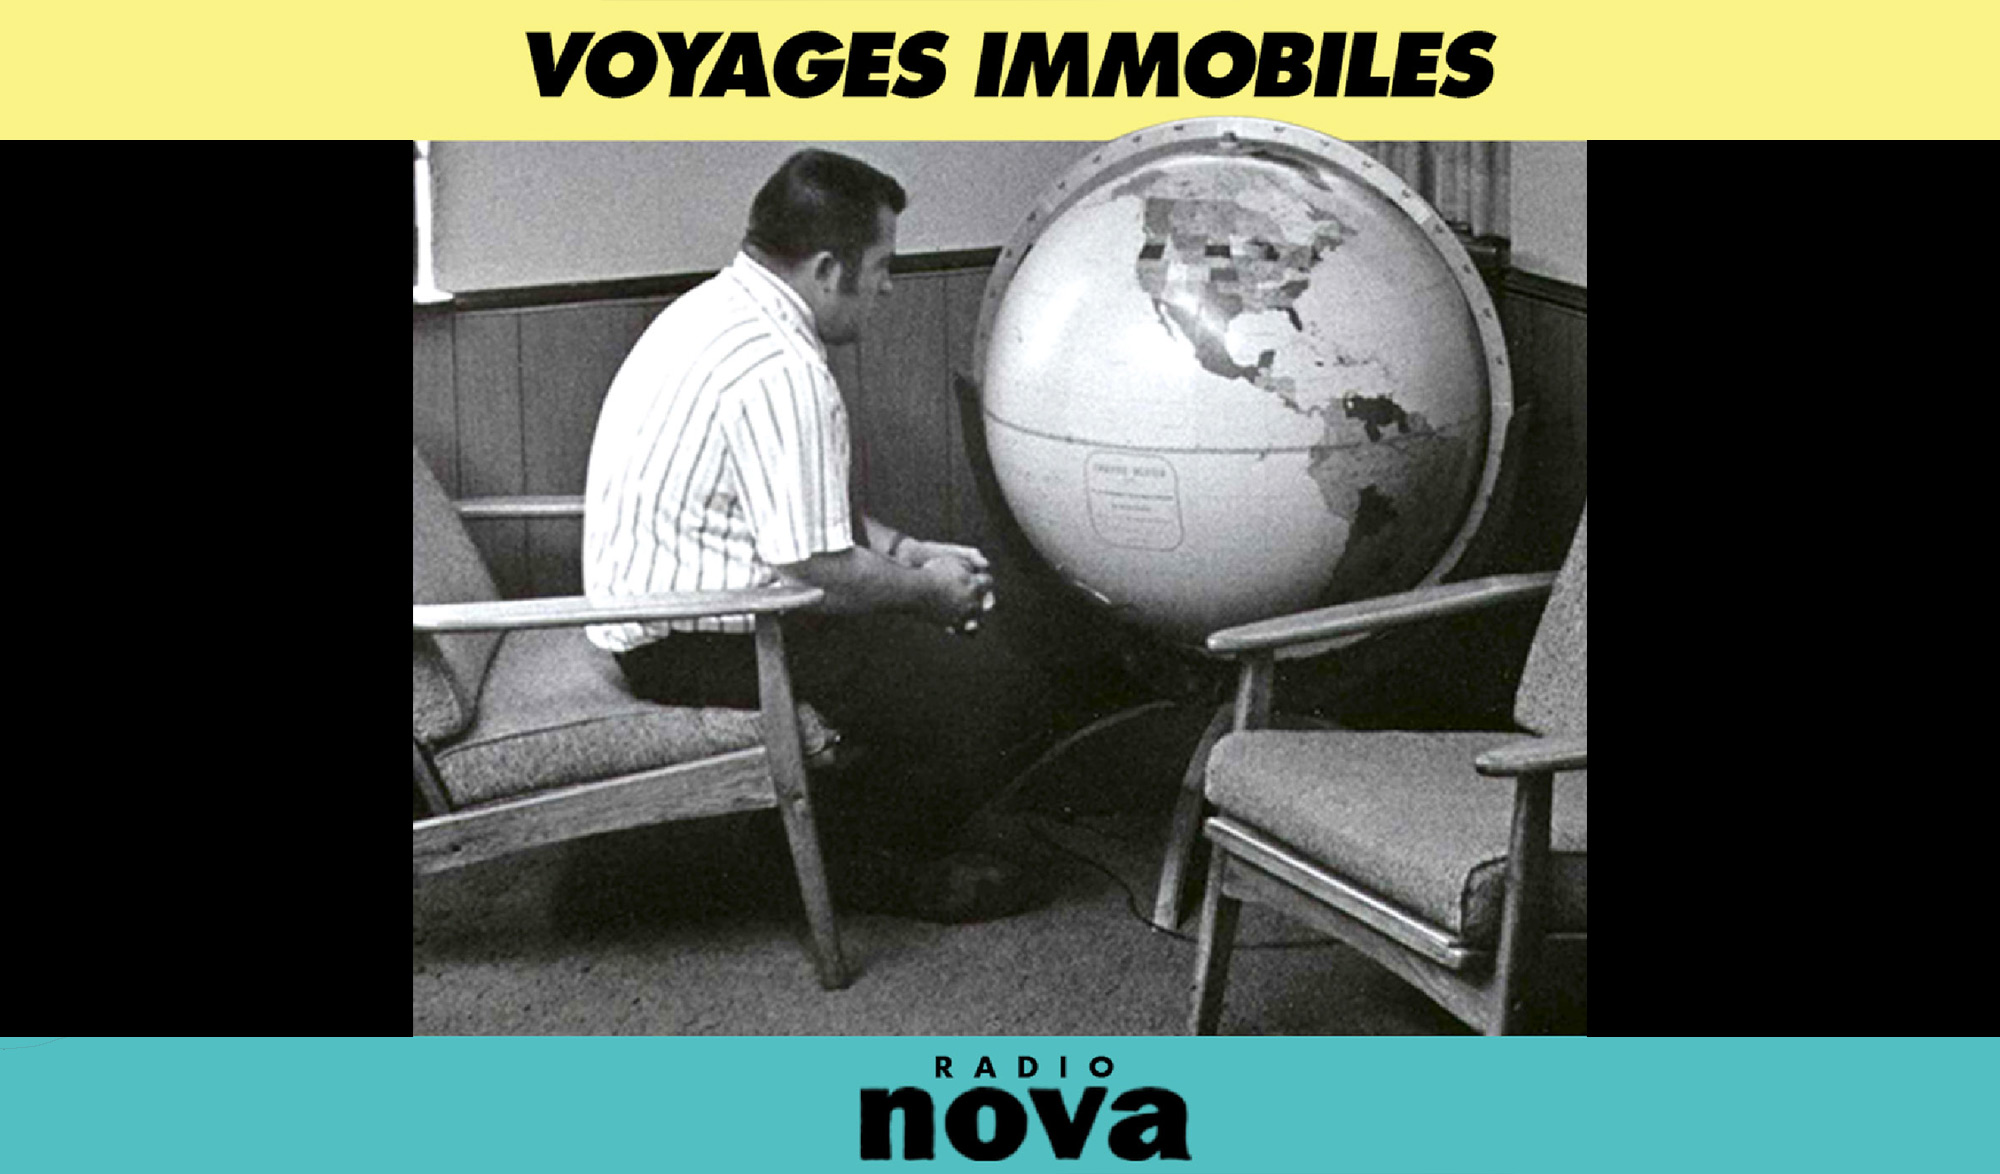 Voyages immobiles